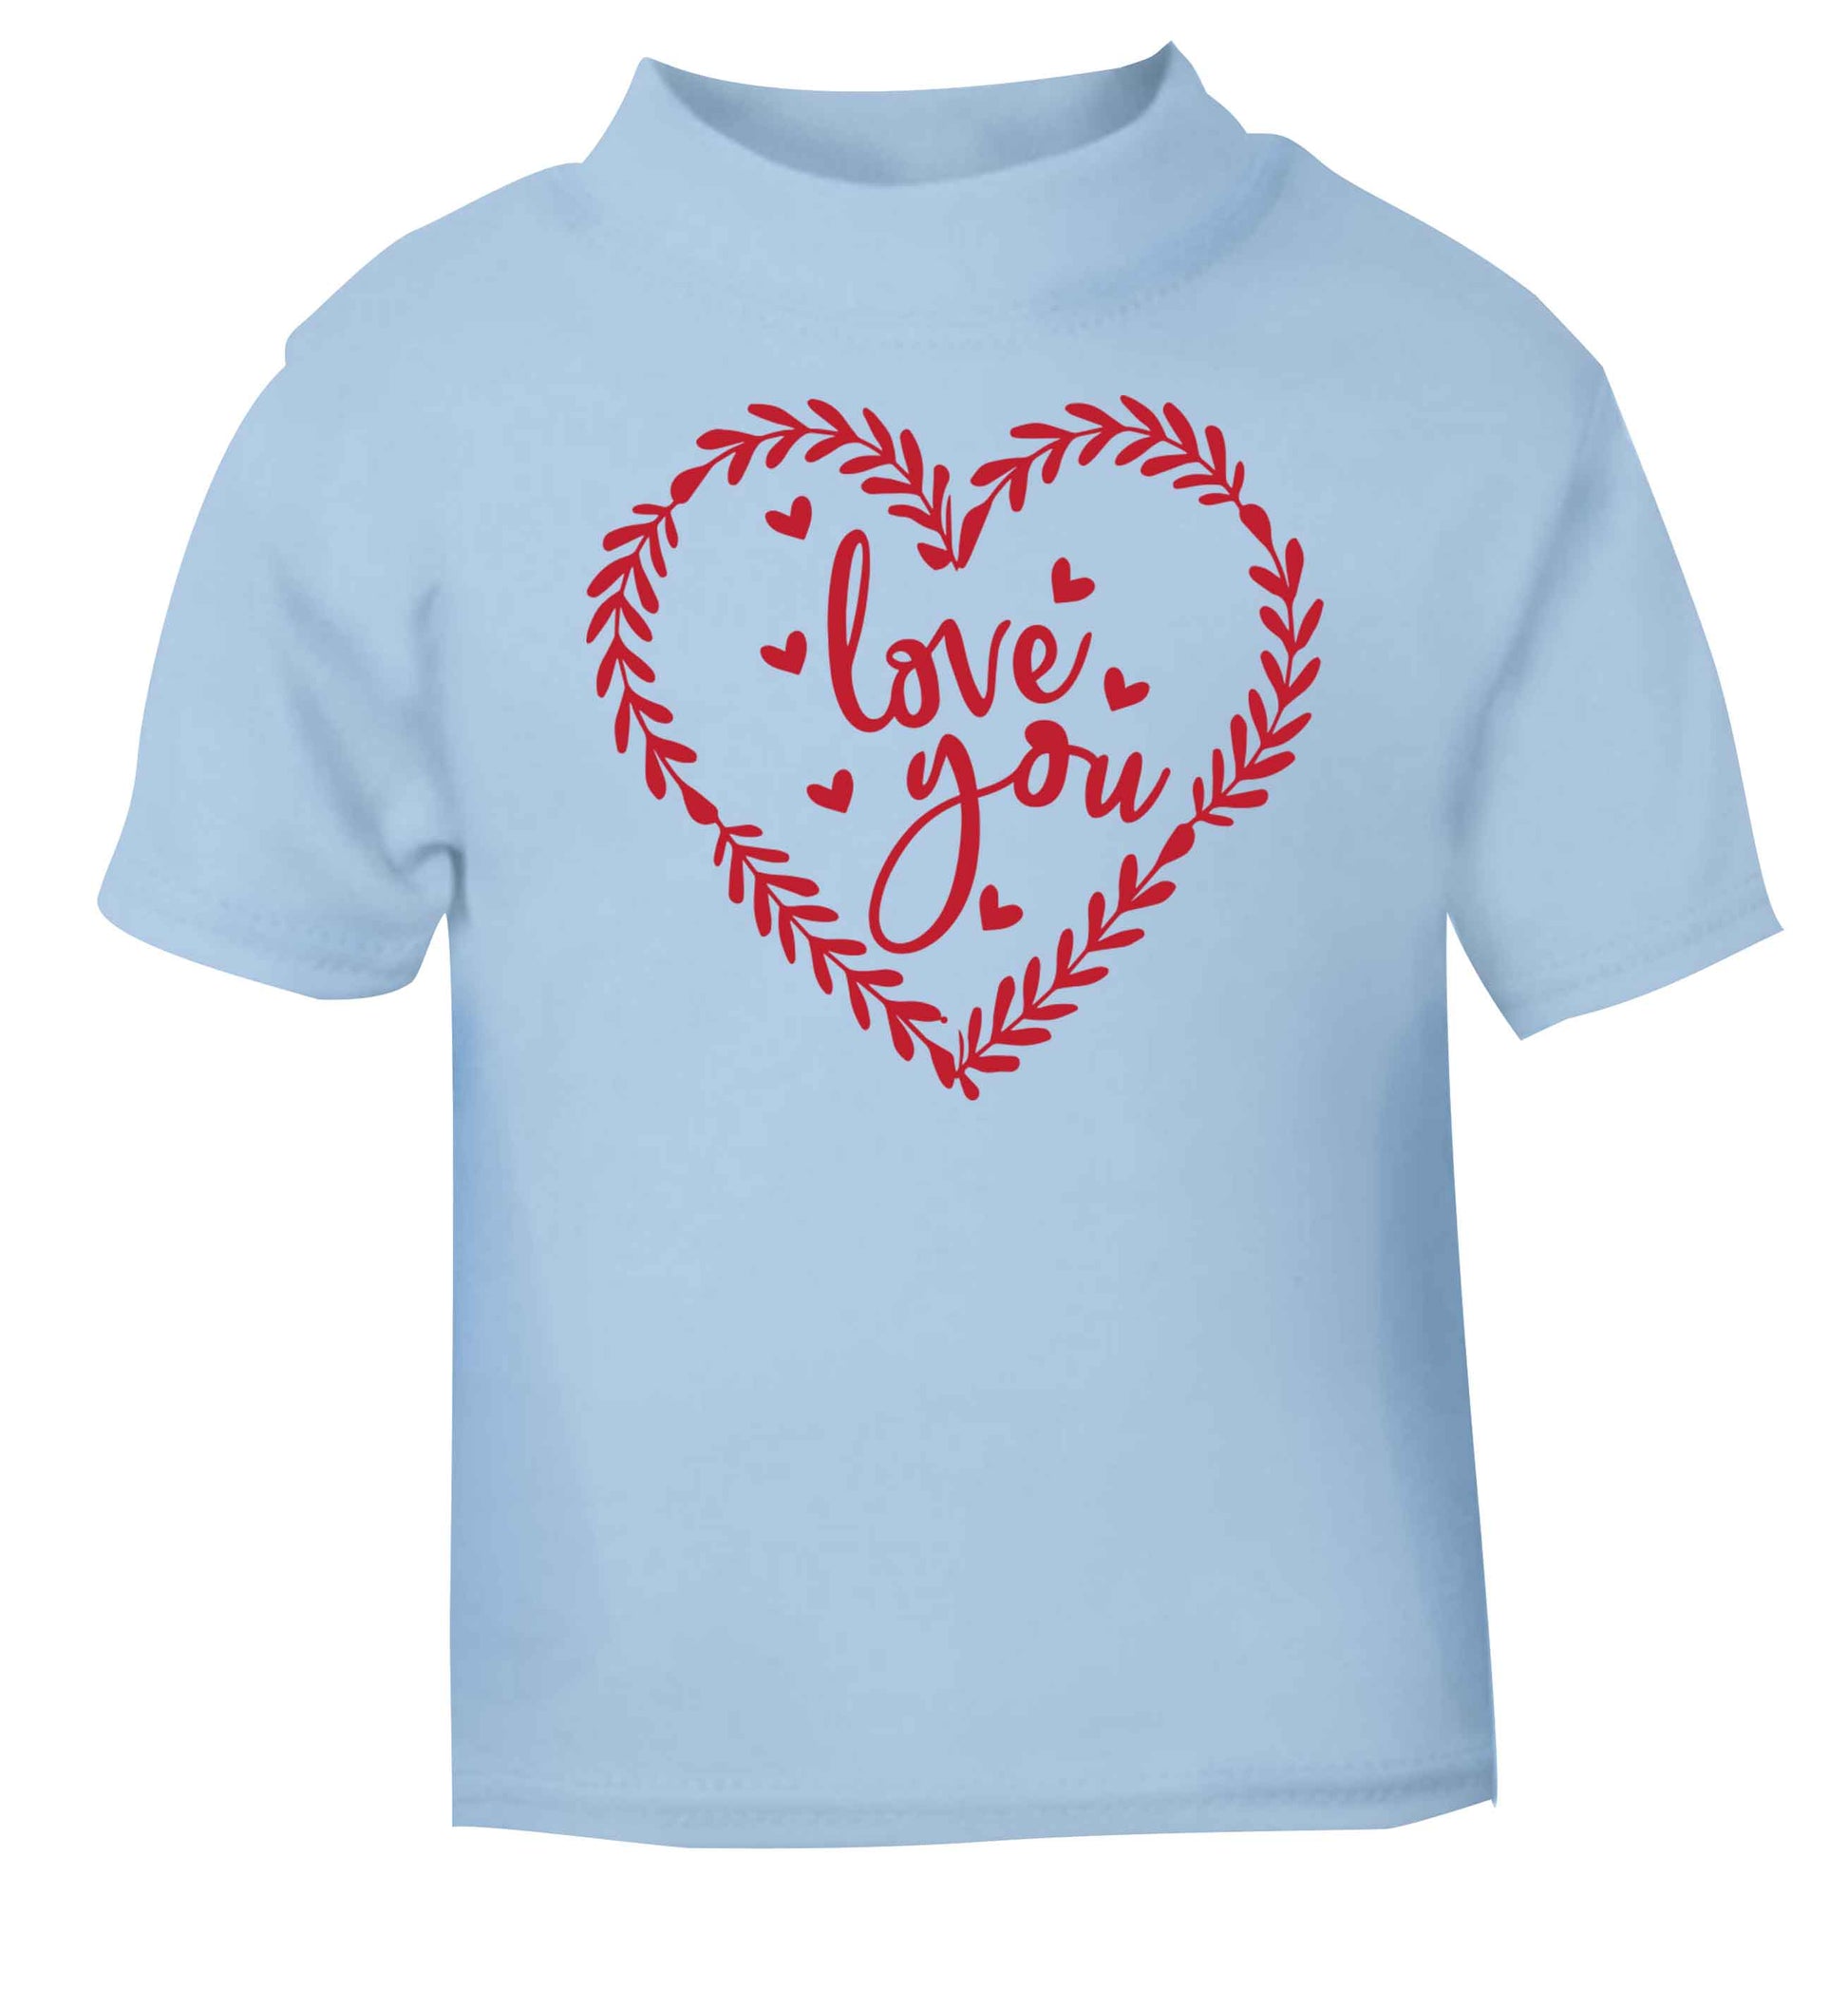 Love you light blue baby toddler Tshirt 2 Years